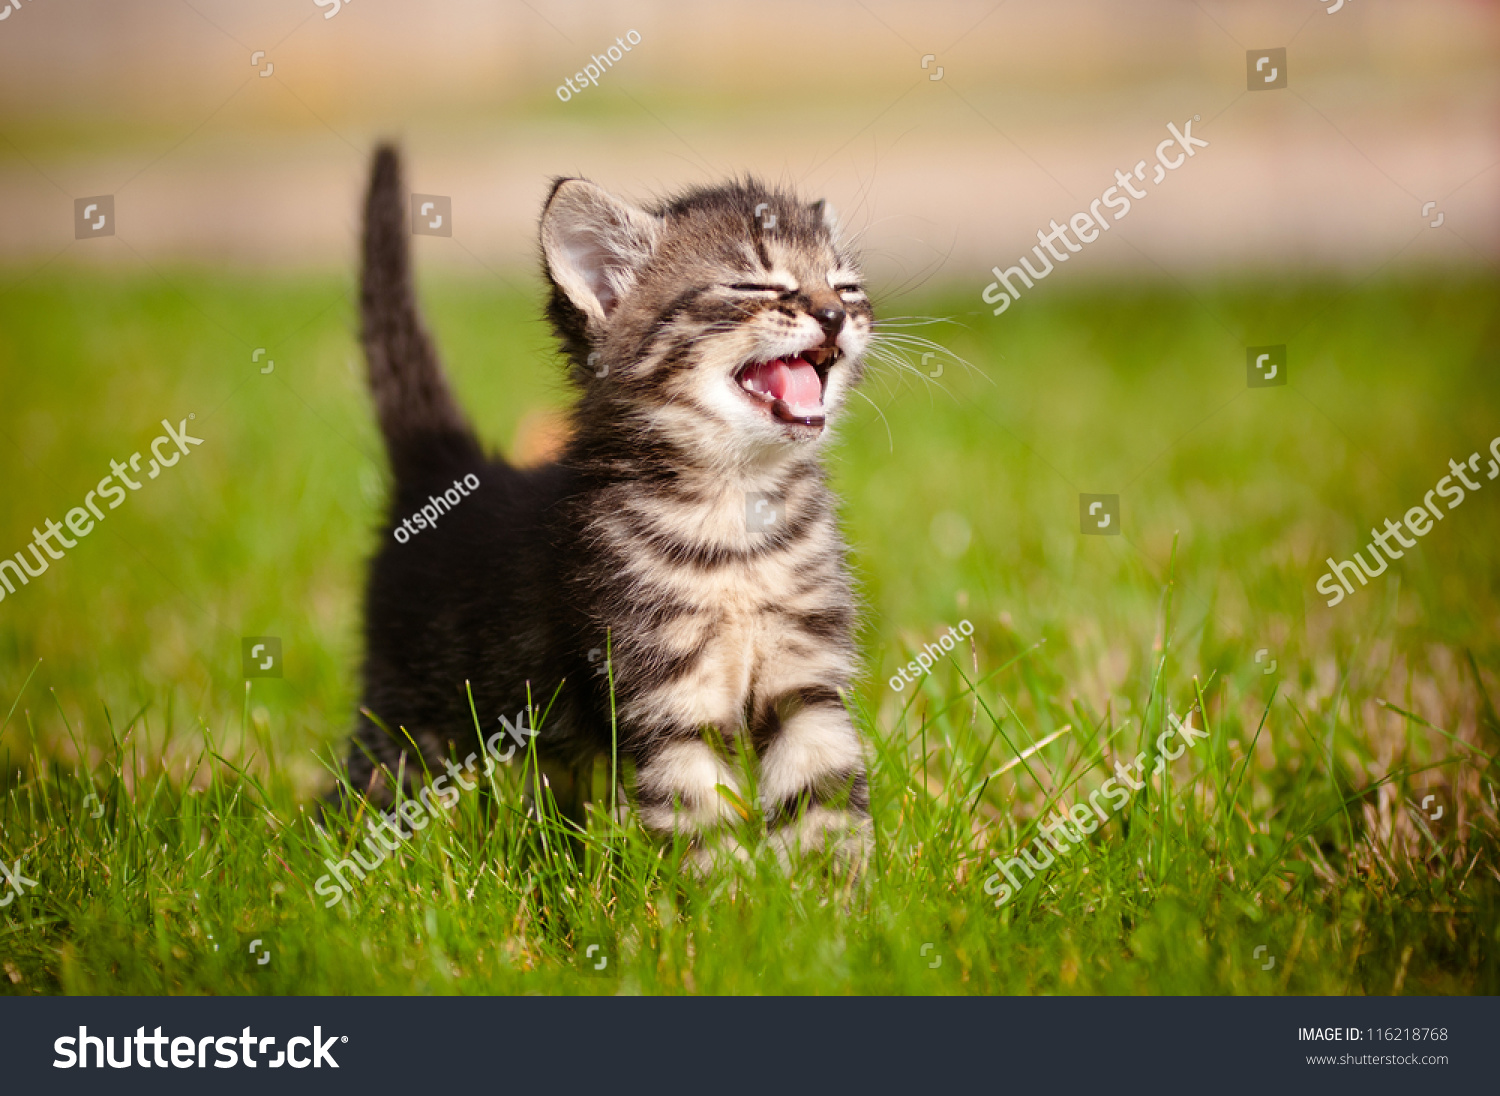 adorable meowing tabby kitten outdoors #116218768